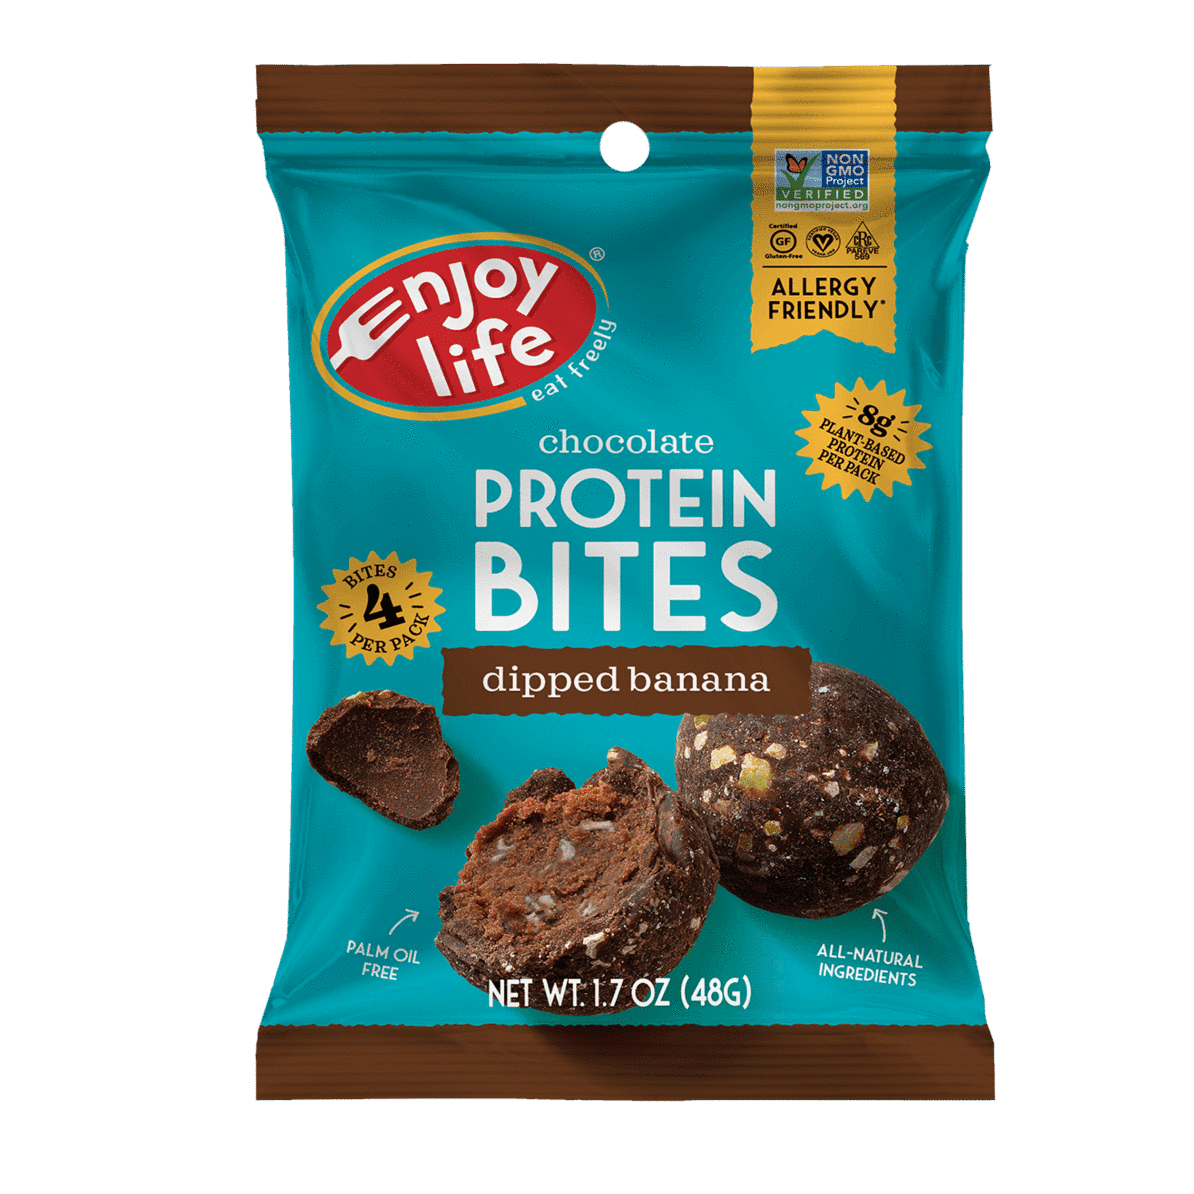 Enjoy Life Protein Bites Dipped Banana Package